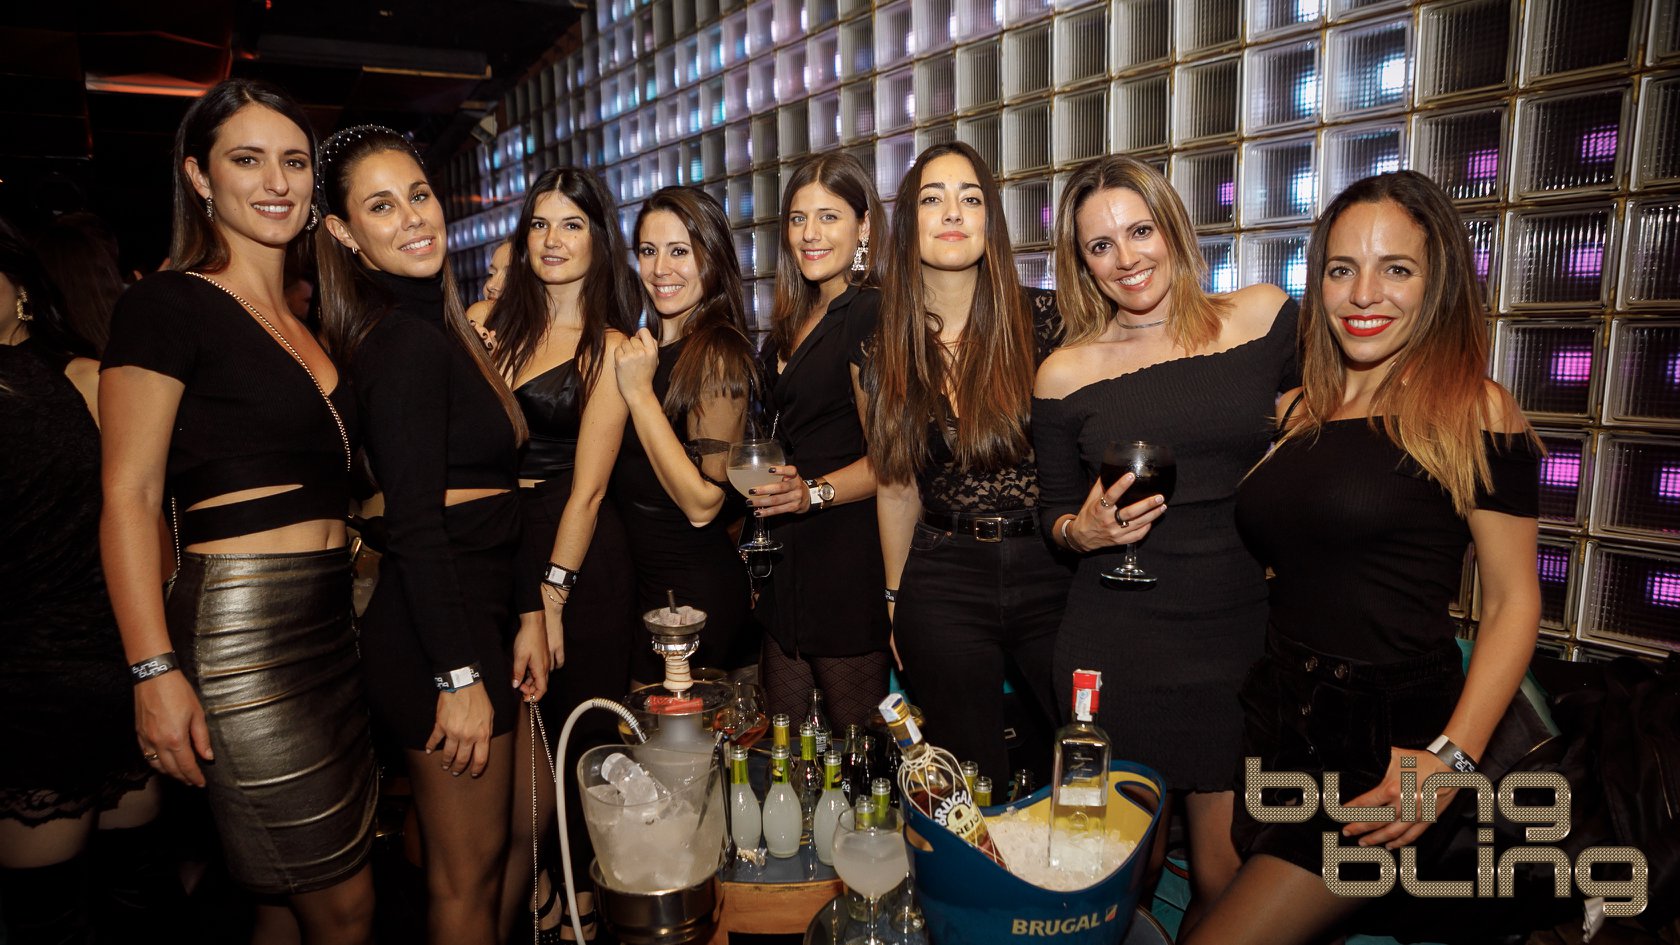 Photos of the VIP Tables at Bling Bling Barcelona